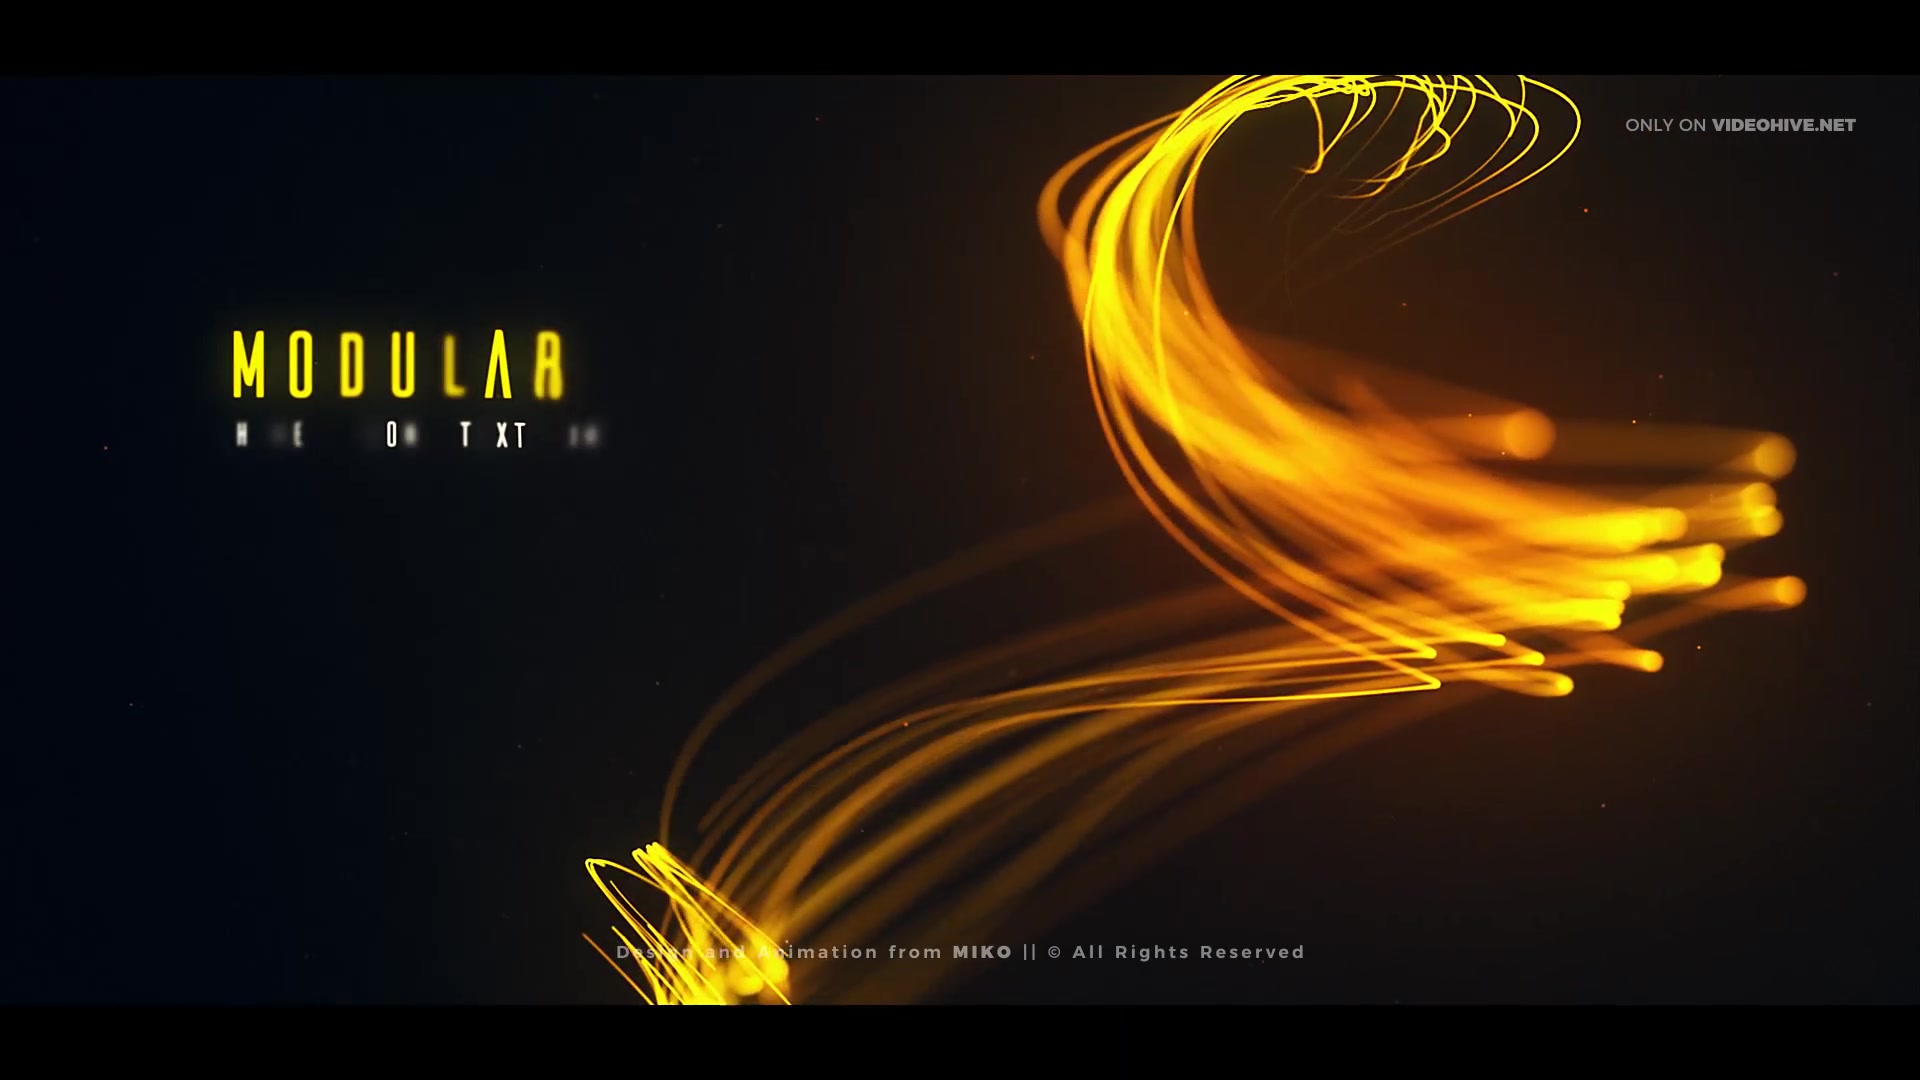 Particle Titles | Trails - Download Videohive 21215911